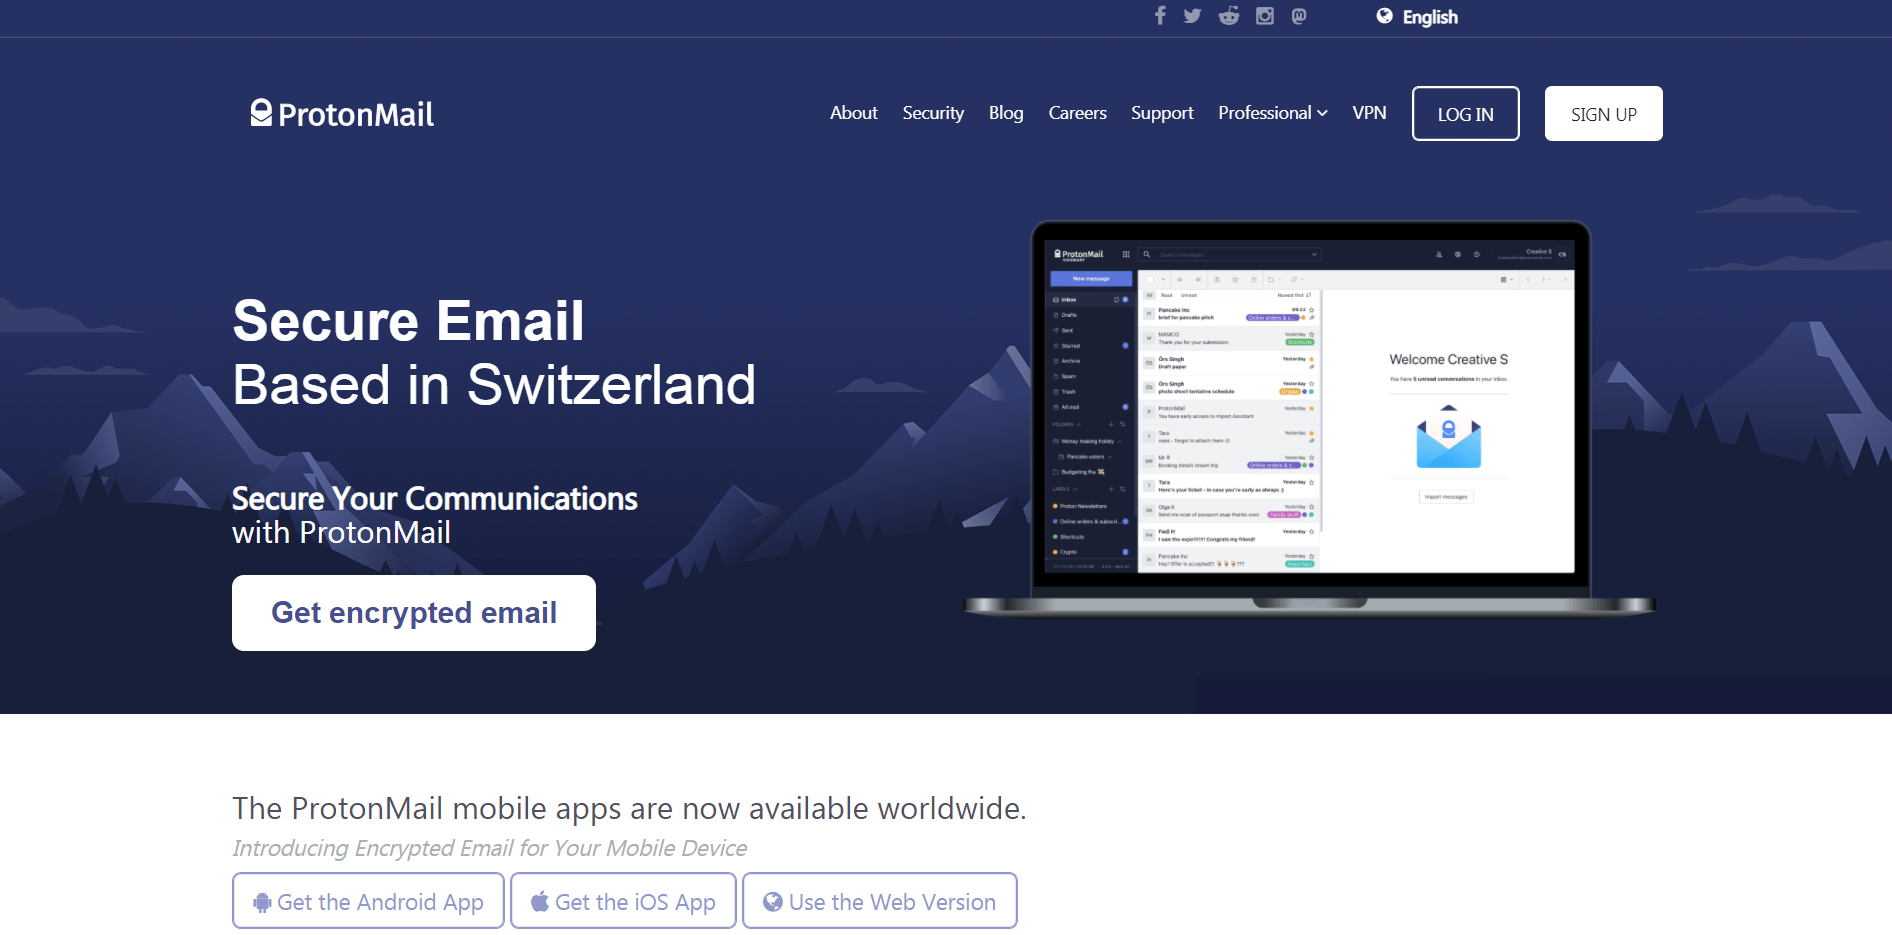 protonmail introduction